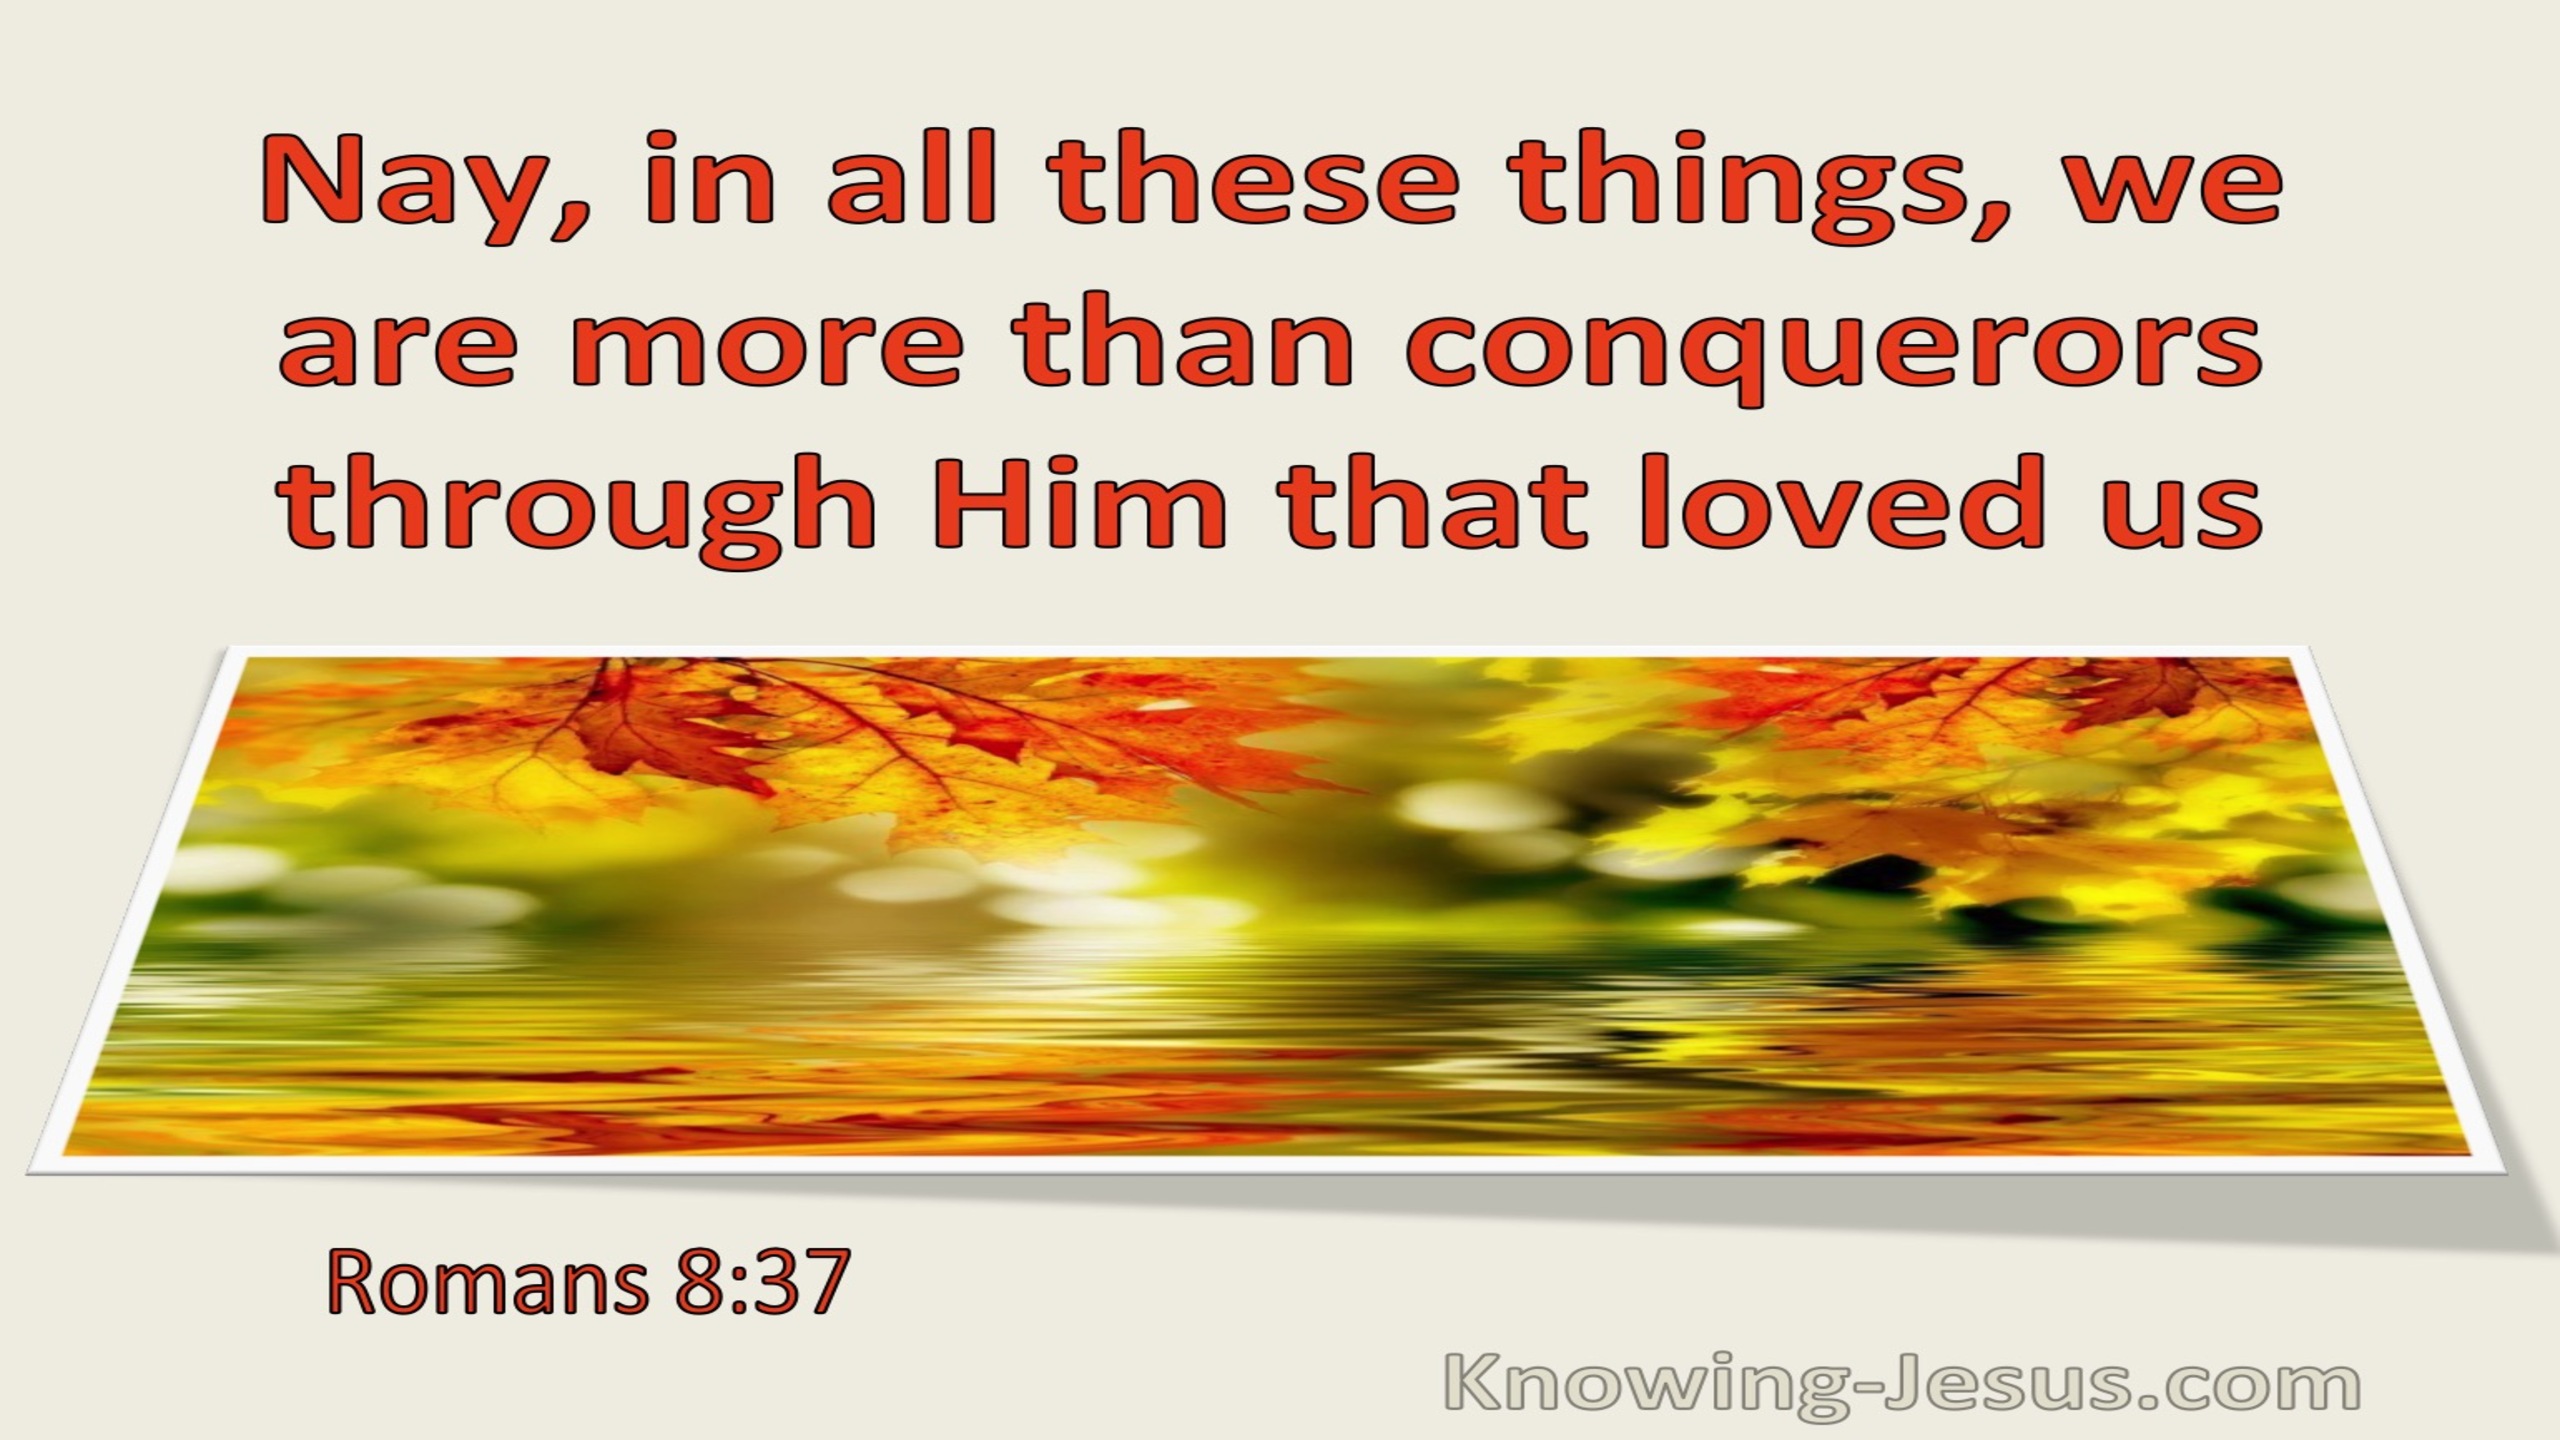 Romans 8:37 In All Things We Are More Than Conquerors Through Him That Loved Us (utmost)03:07